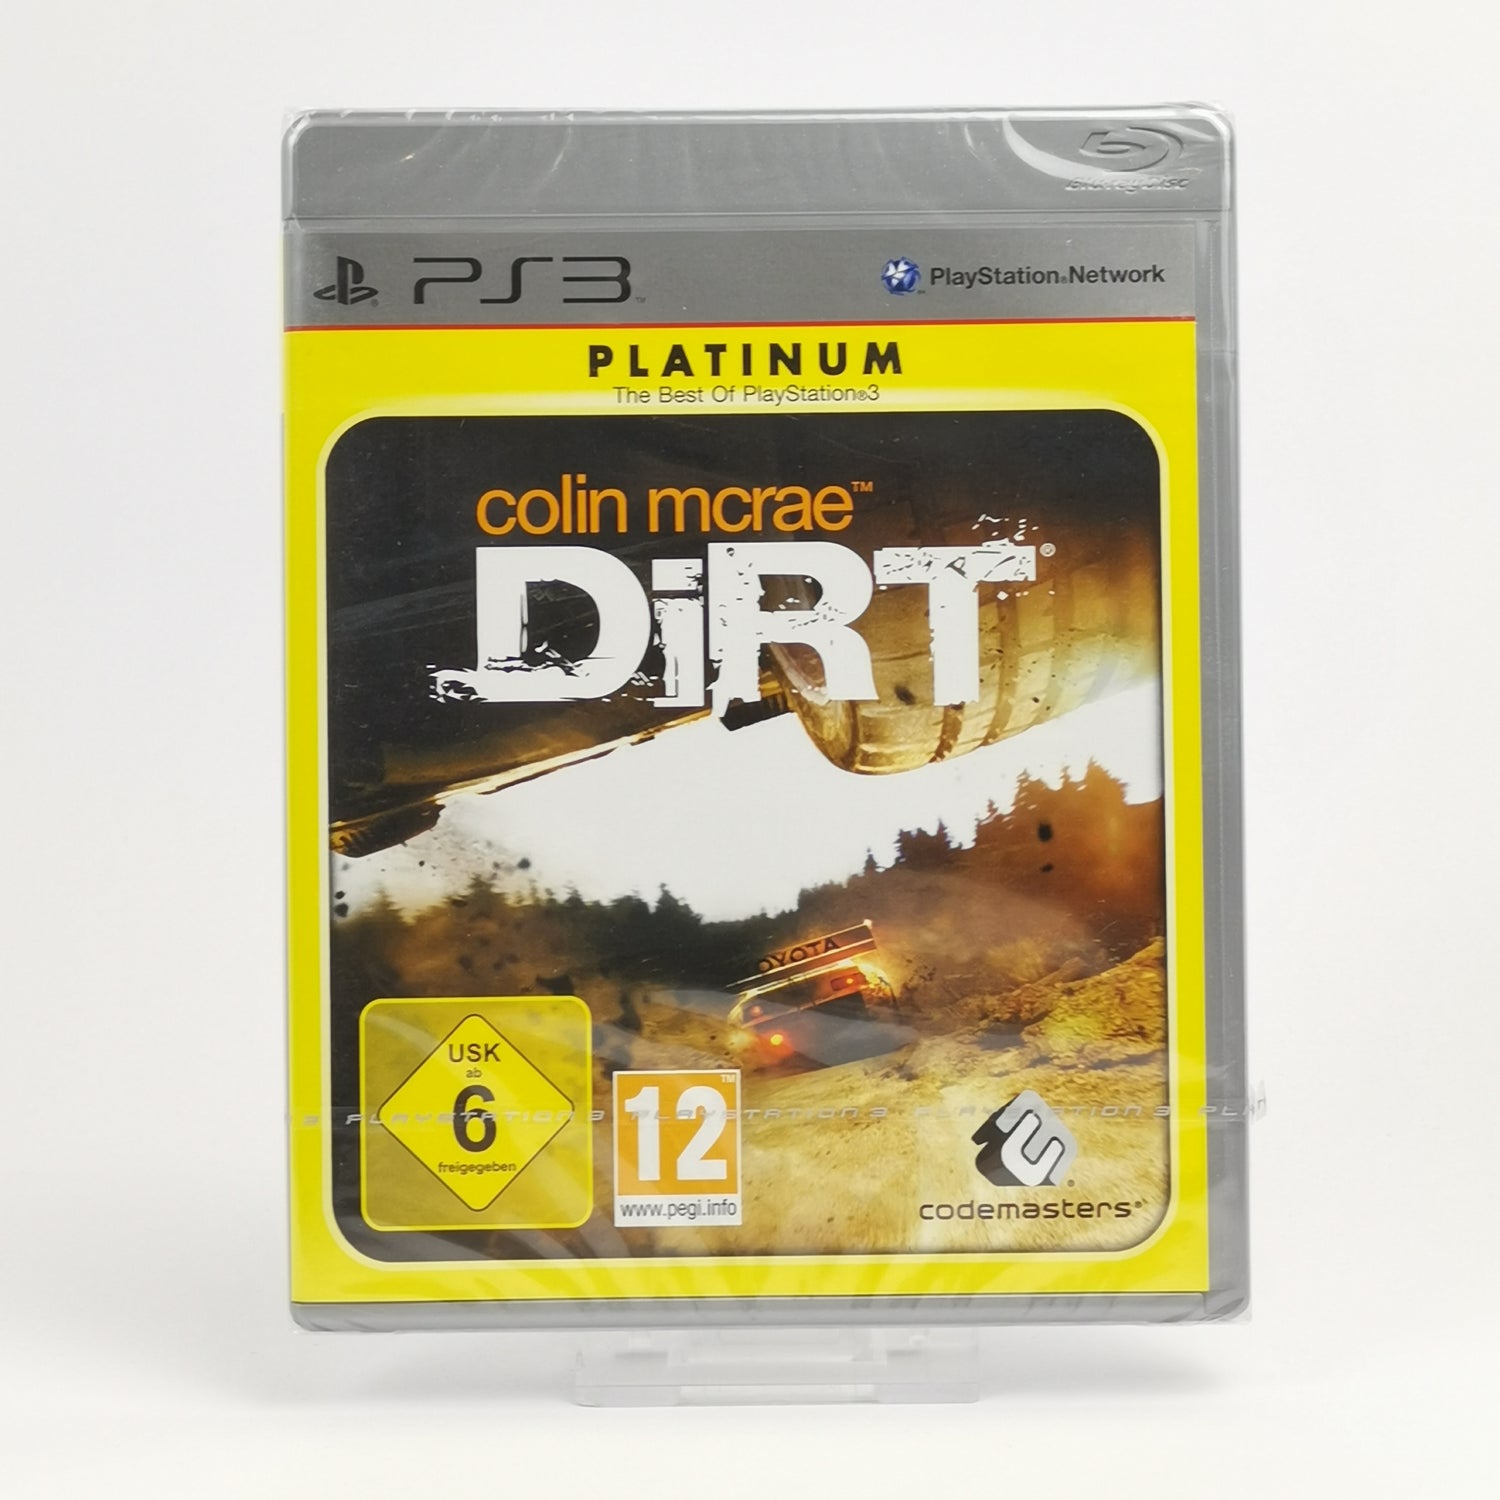 Sony Playstation 3 Game: Colin Mcrae Dirt | PS3 Platinum - NEW NEW SEALED